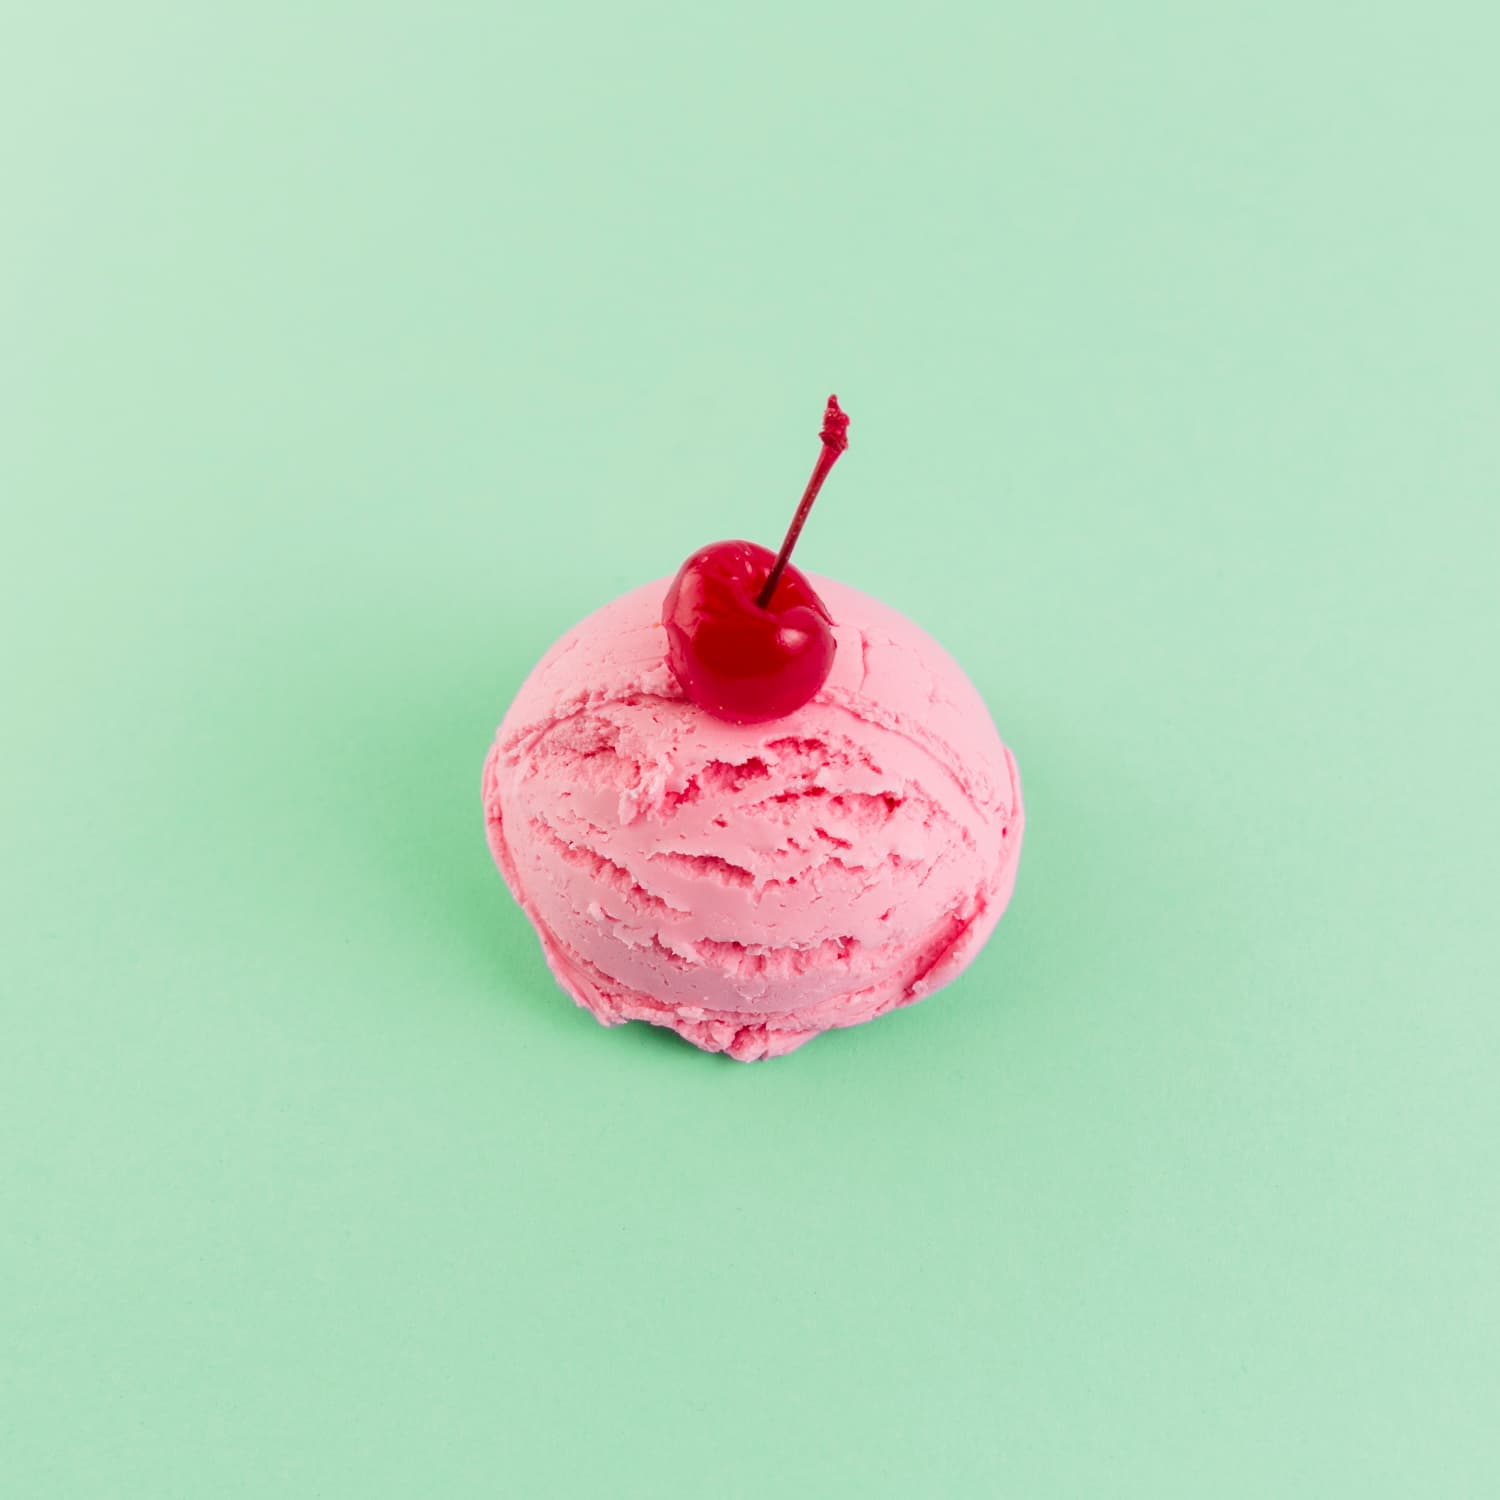 cherry on top of pink-ice-cream against green background